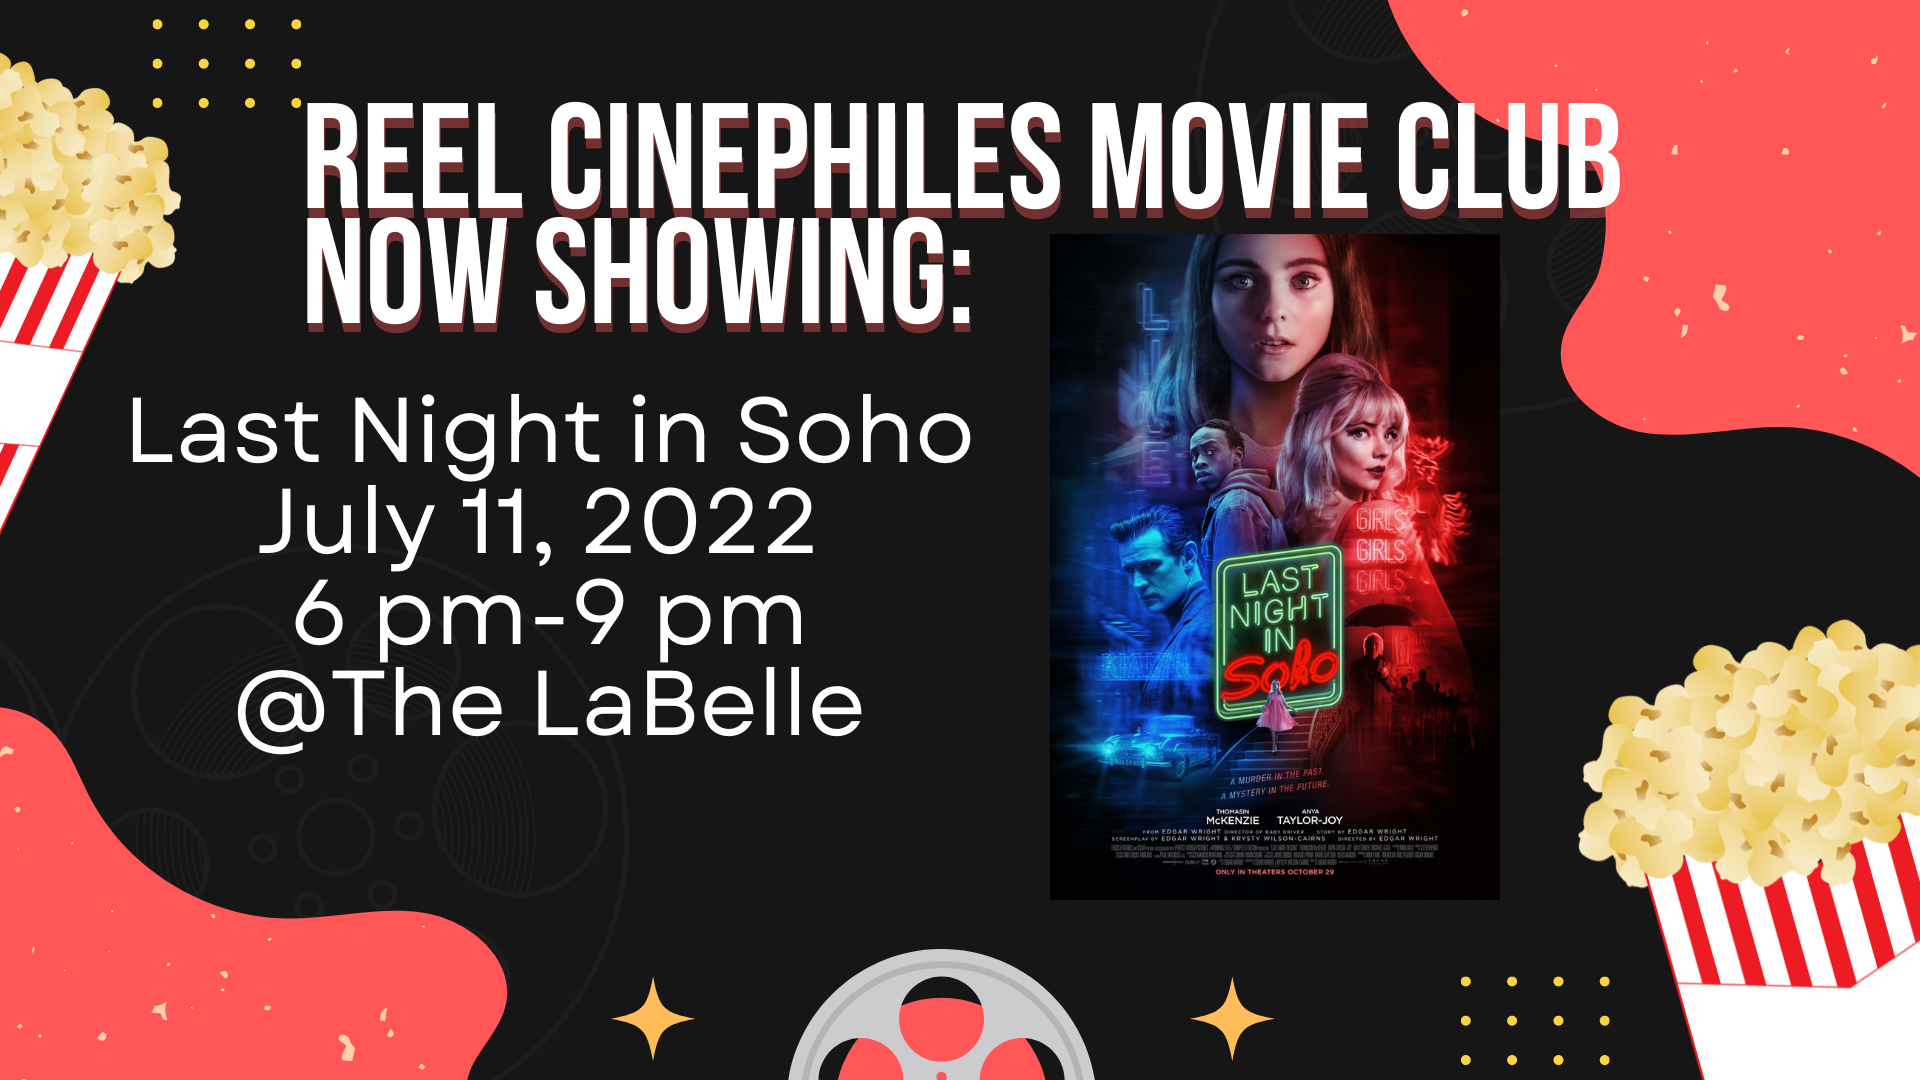 Reel Cinephiles Movie Club @ The Labelle